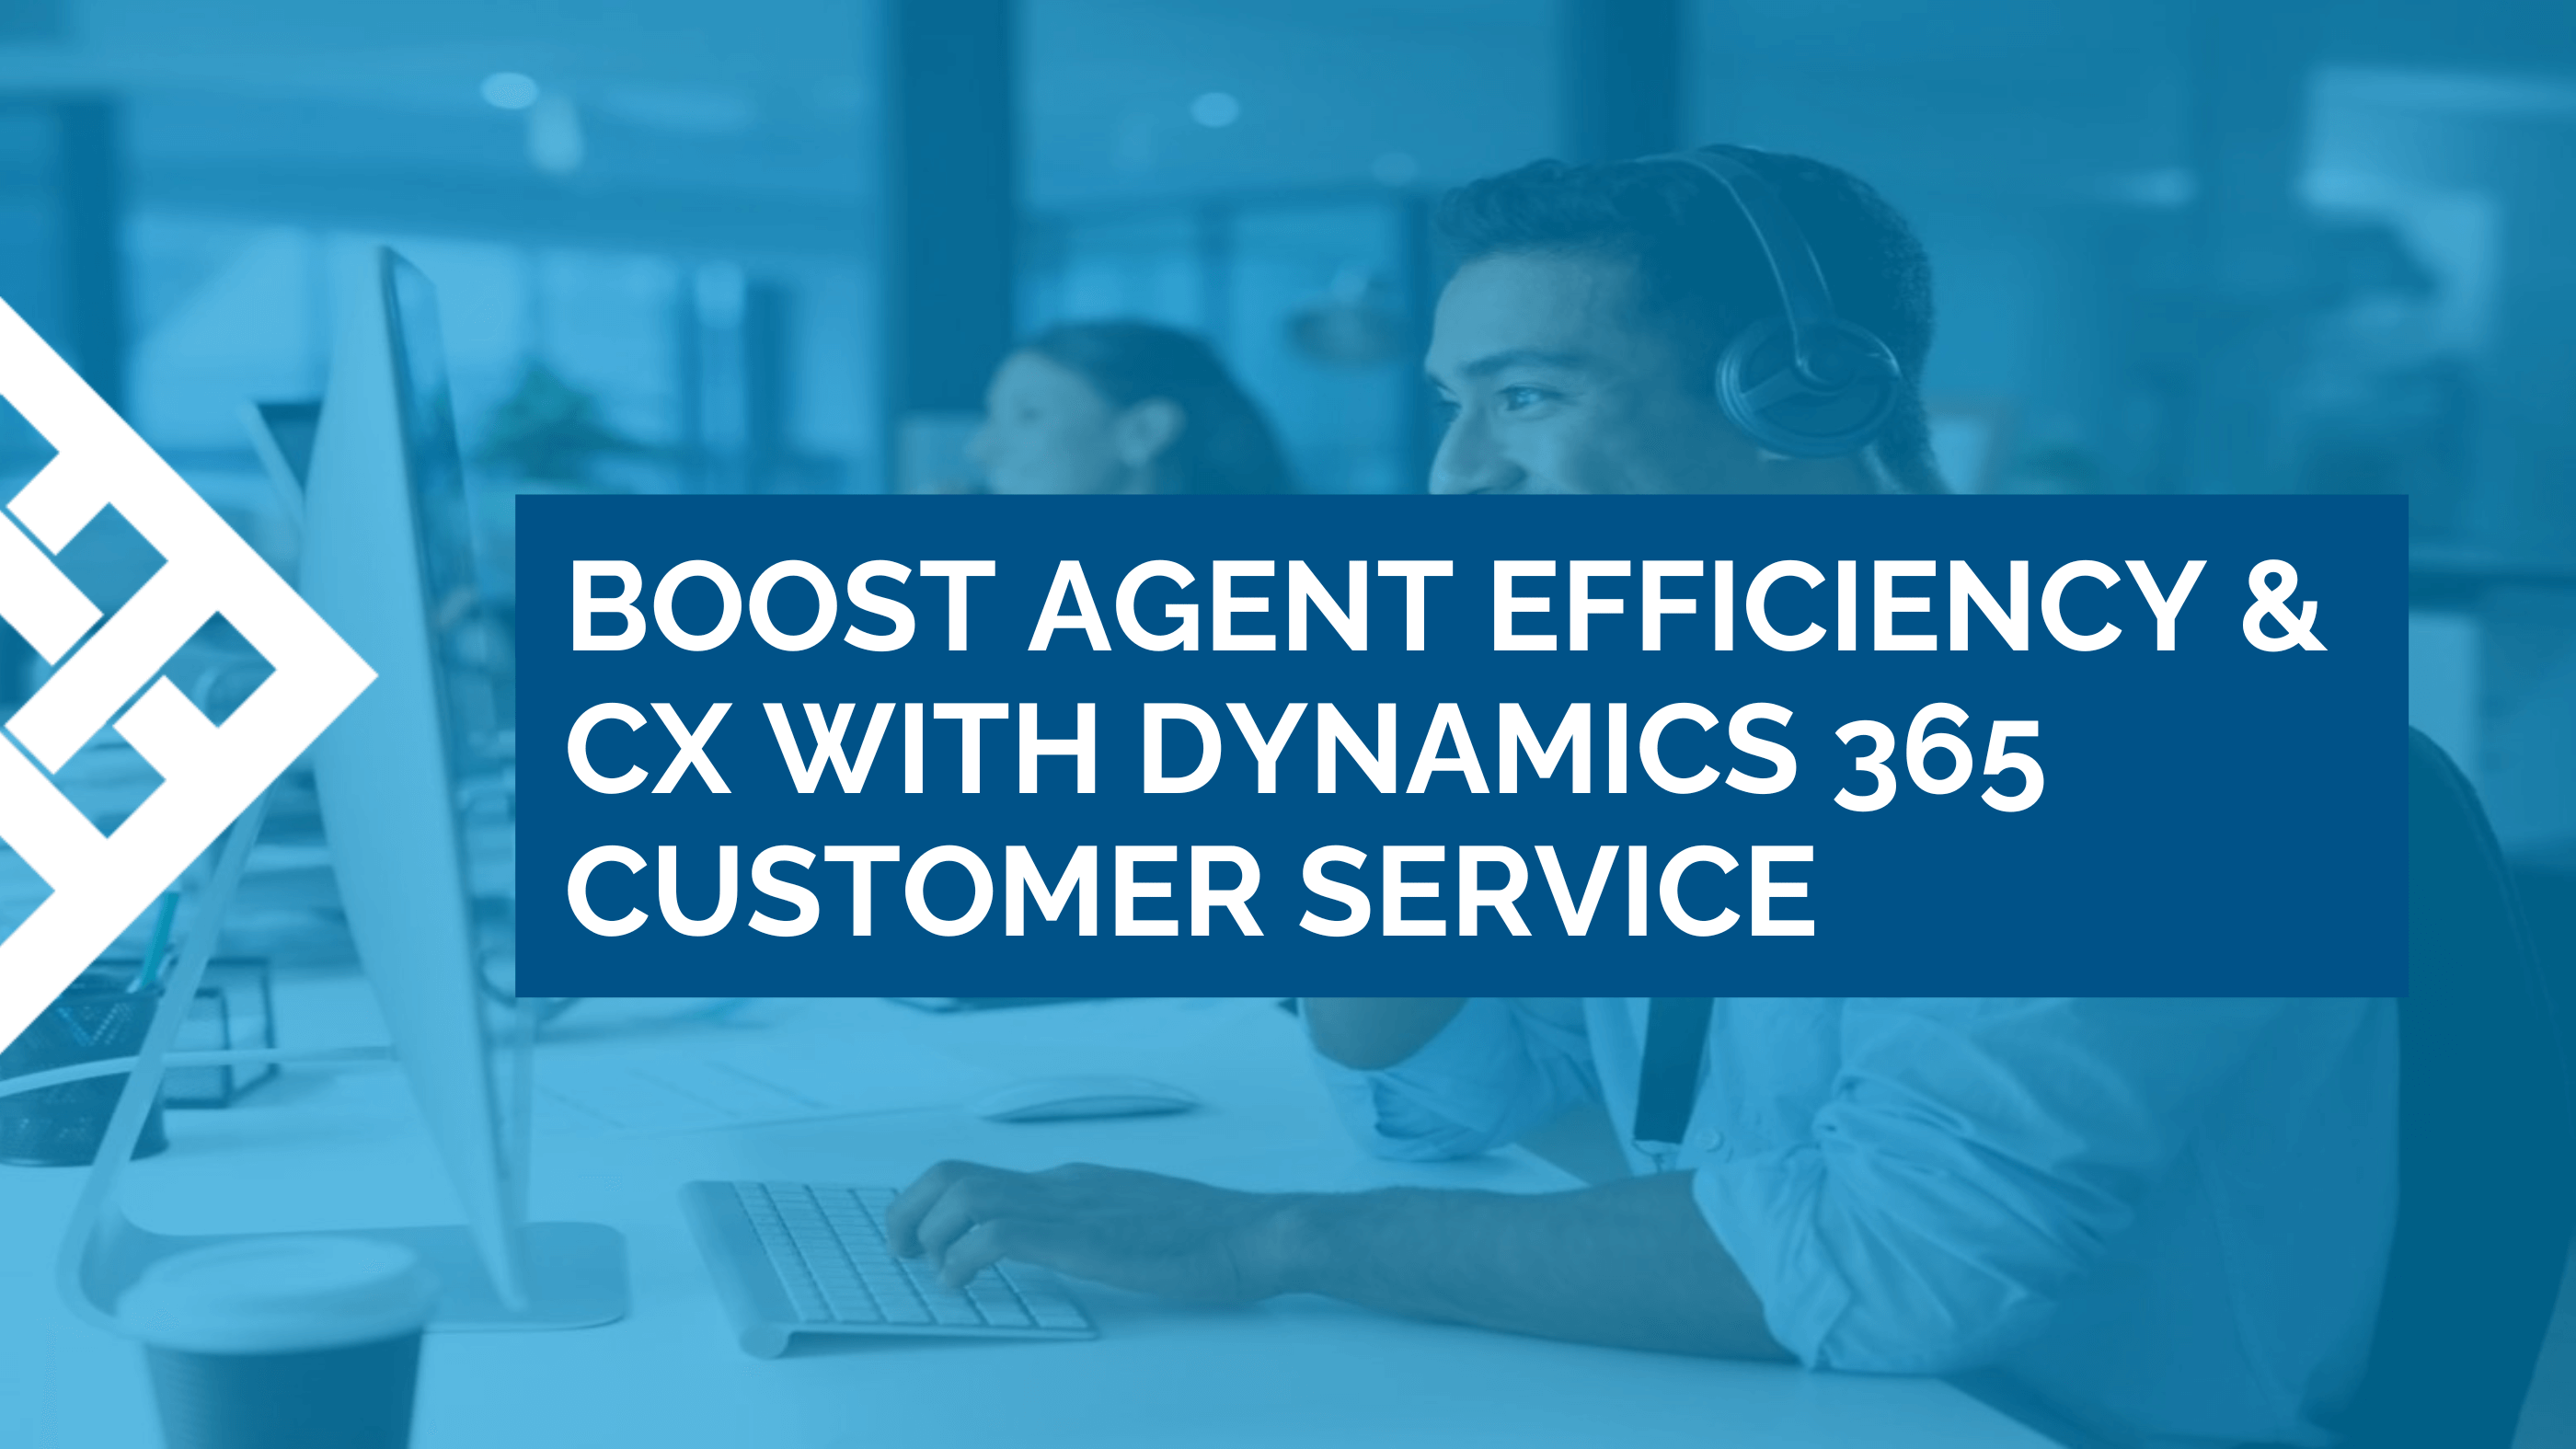 Boost Agent Efficiency & CX with Dynamics 365 Customer Service Blog Graphic